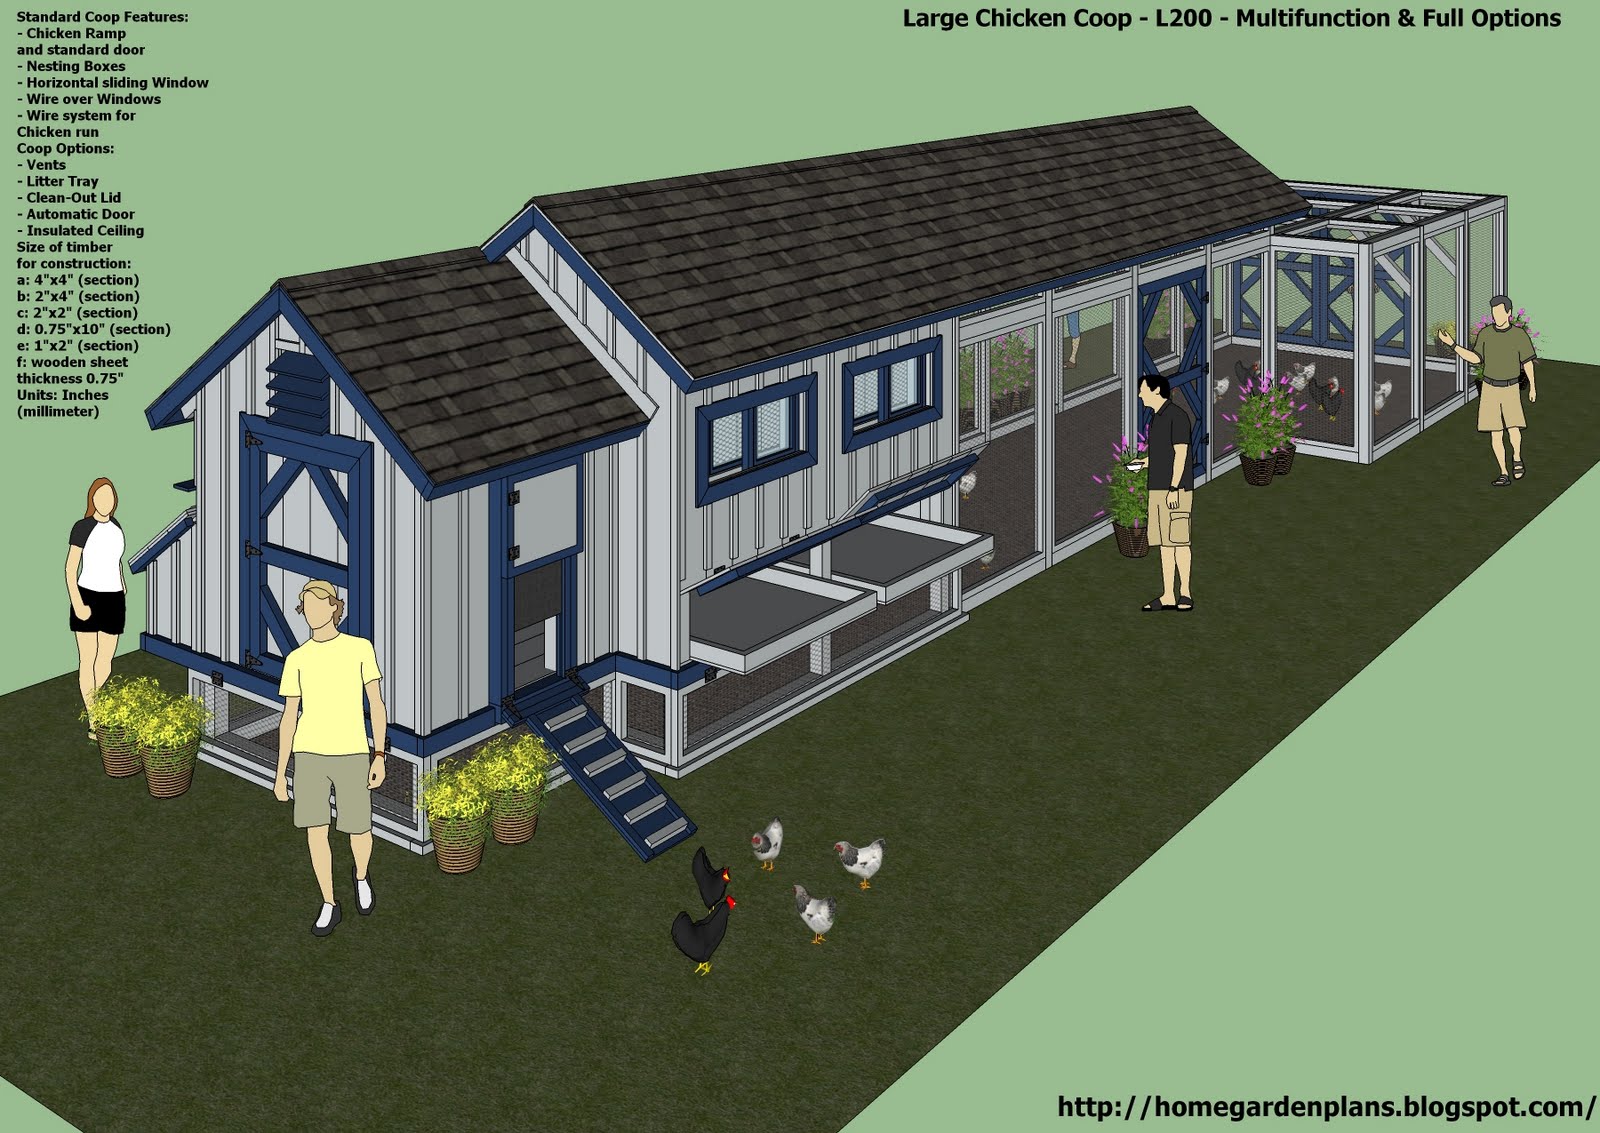 home garden plans: L200 - Large Chicken Coop Plans - How to Build a 